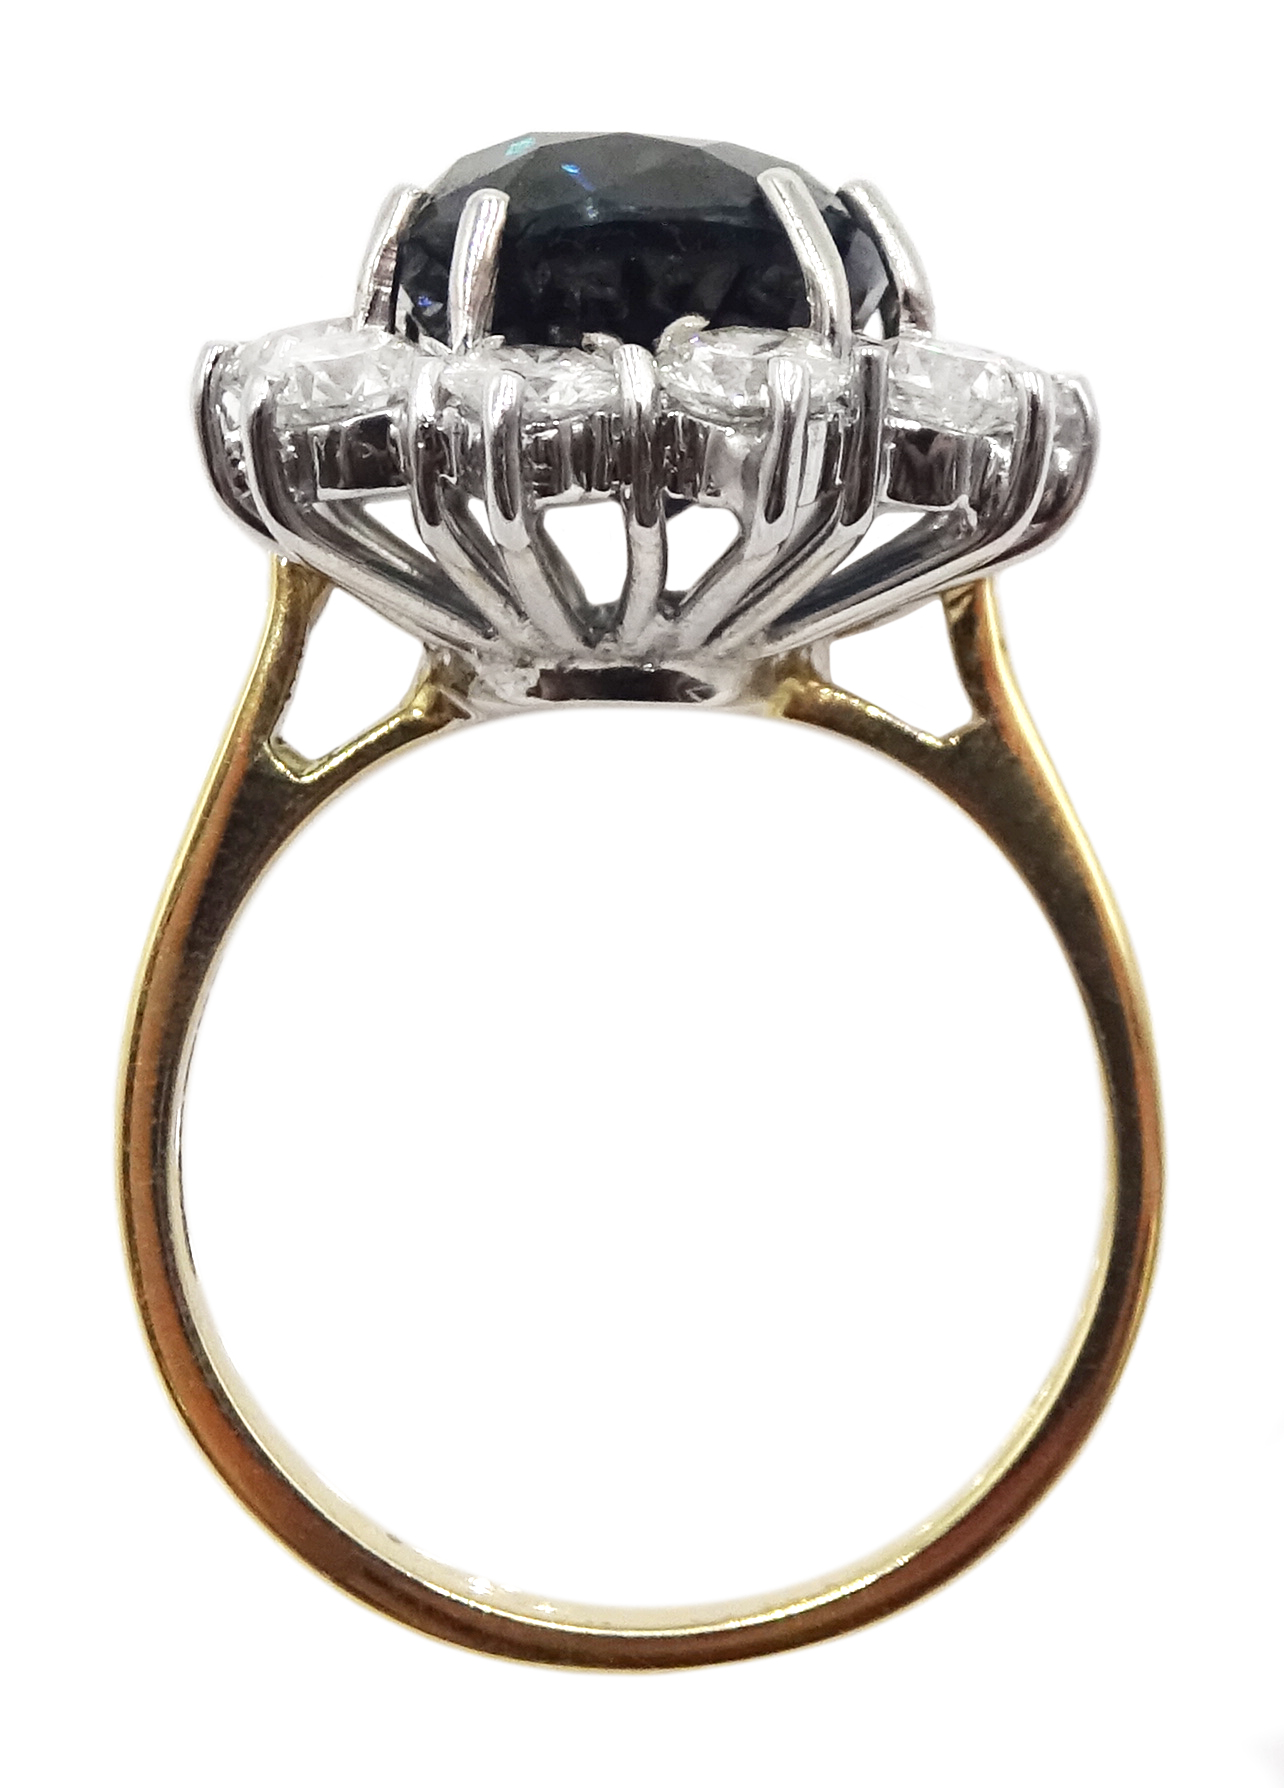 18ct gold, diamond and untreated sapphire cluster ring, sapphire 7.26 carat - Image 6 of 10